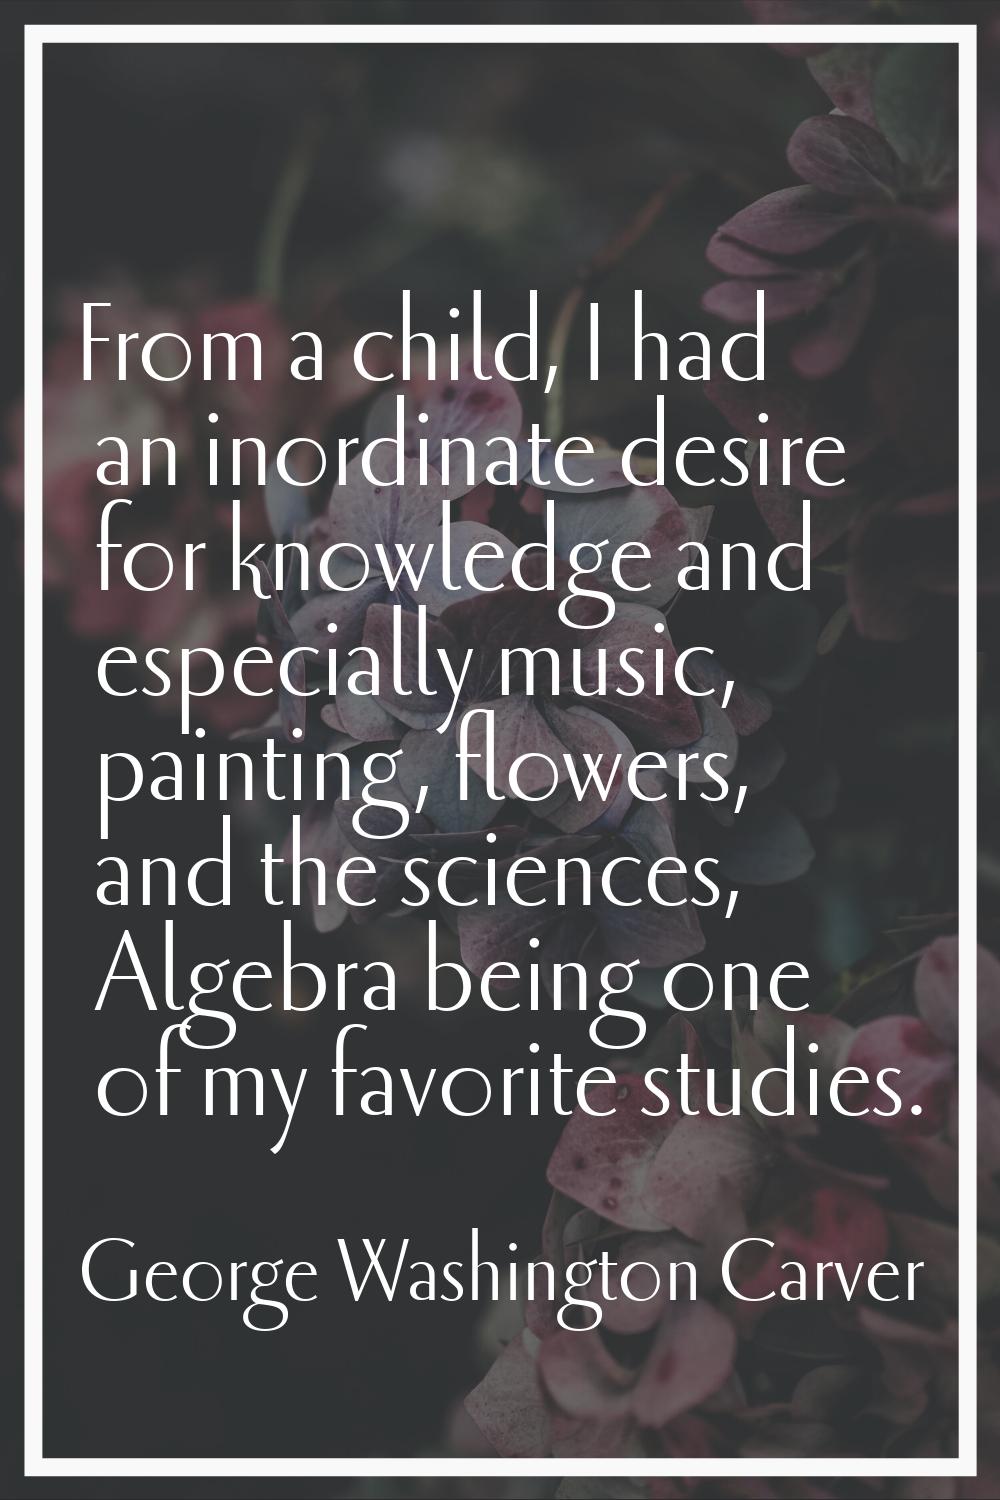 From a child, I had an inordinate desire for knowledge and especially music, painting, flowers, and